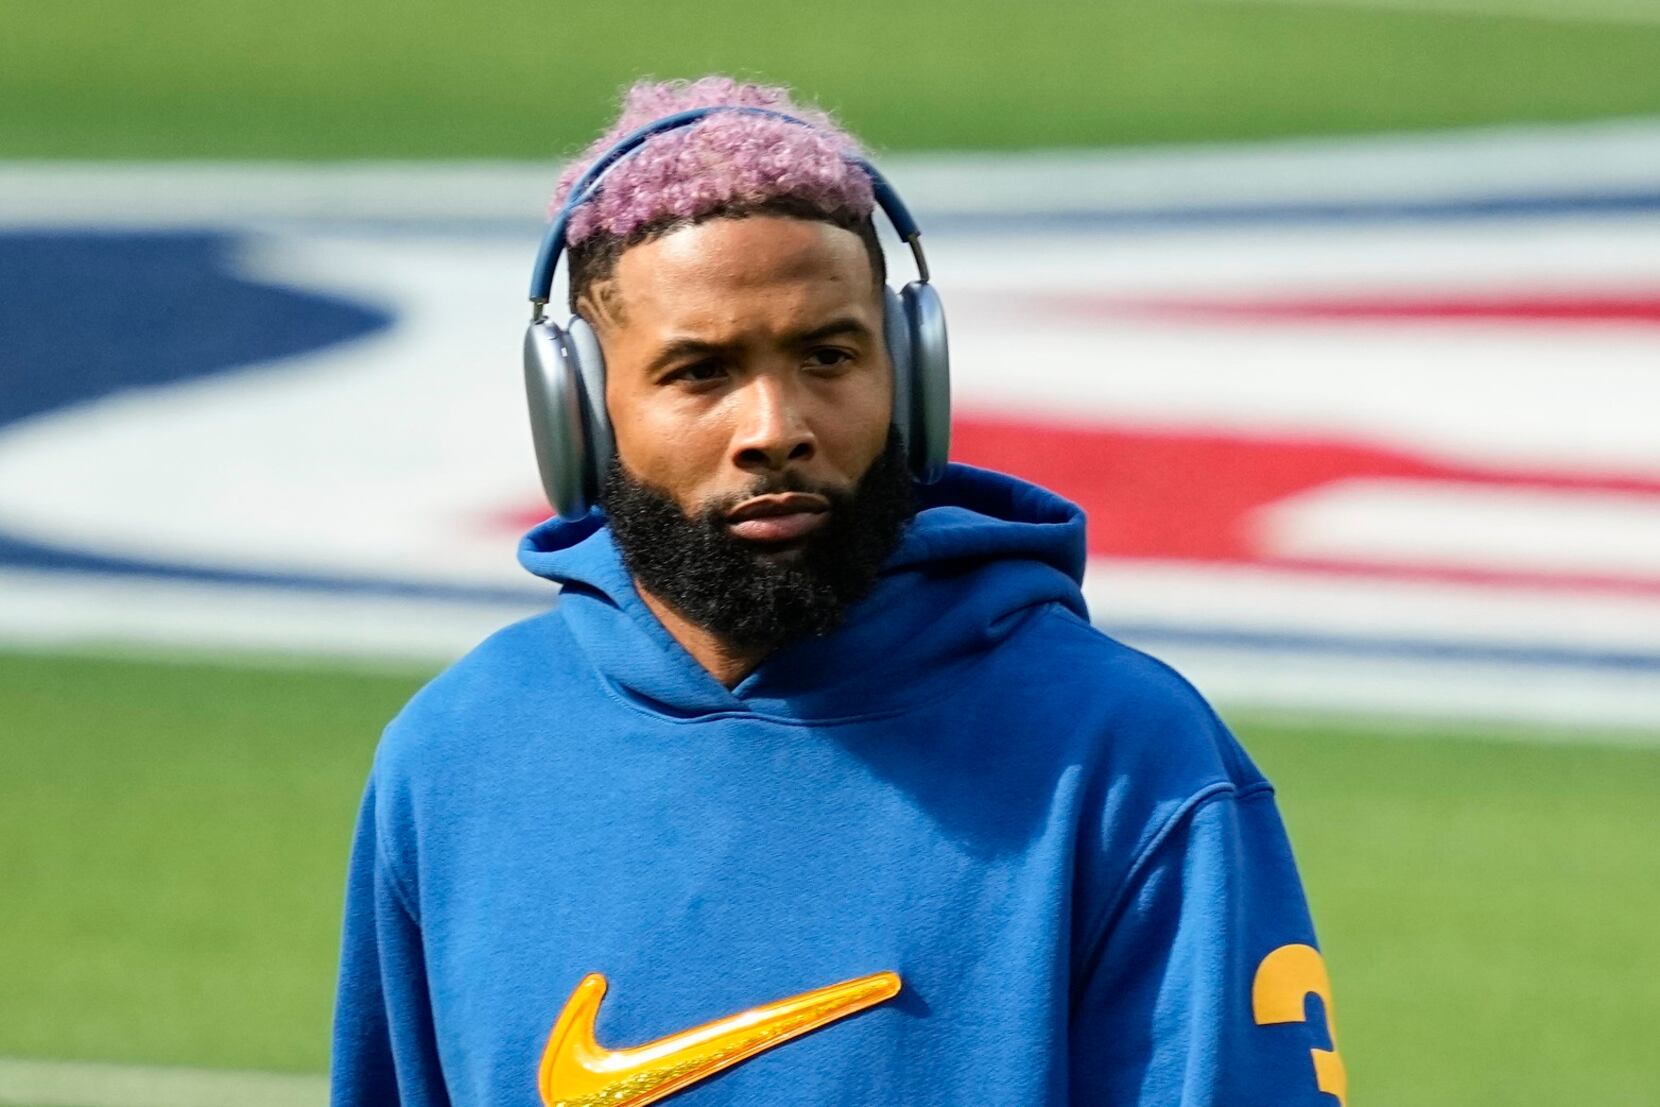 NFL rumors: Chiefs, Ravens, Cowboys are suitors for Odell Beckham Jr.